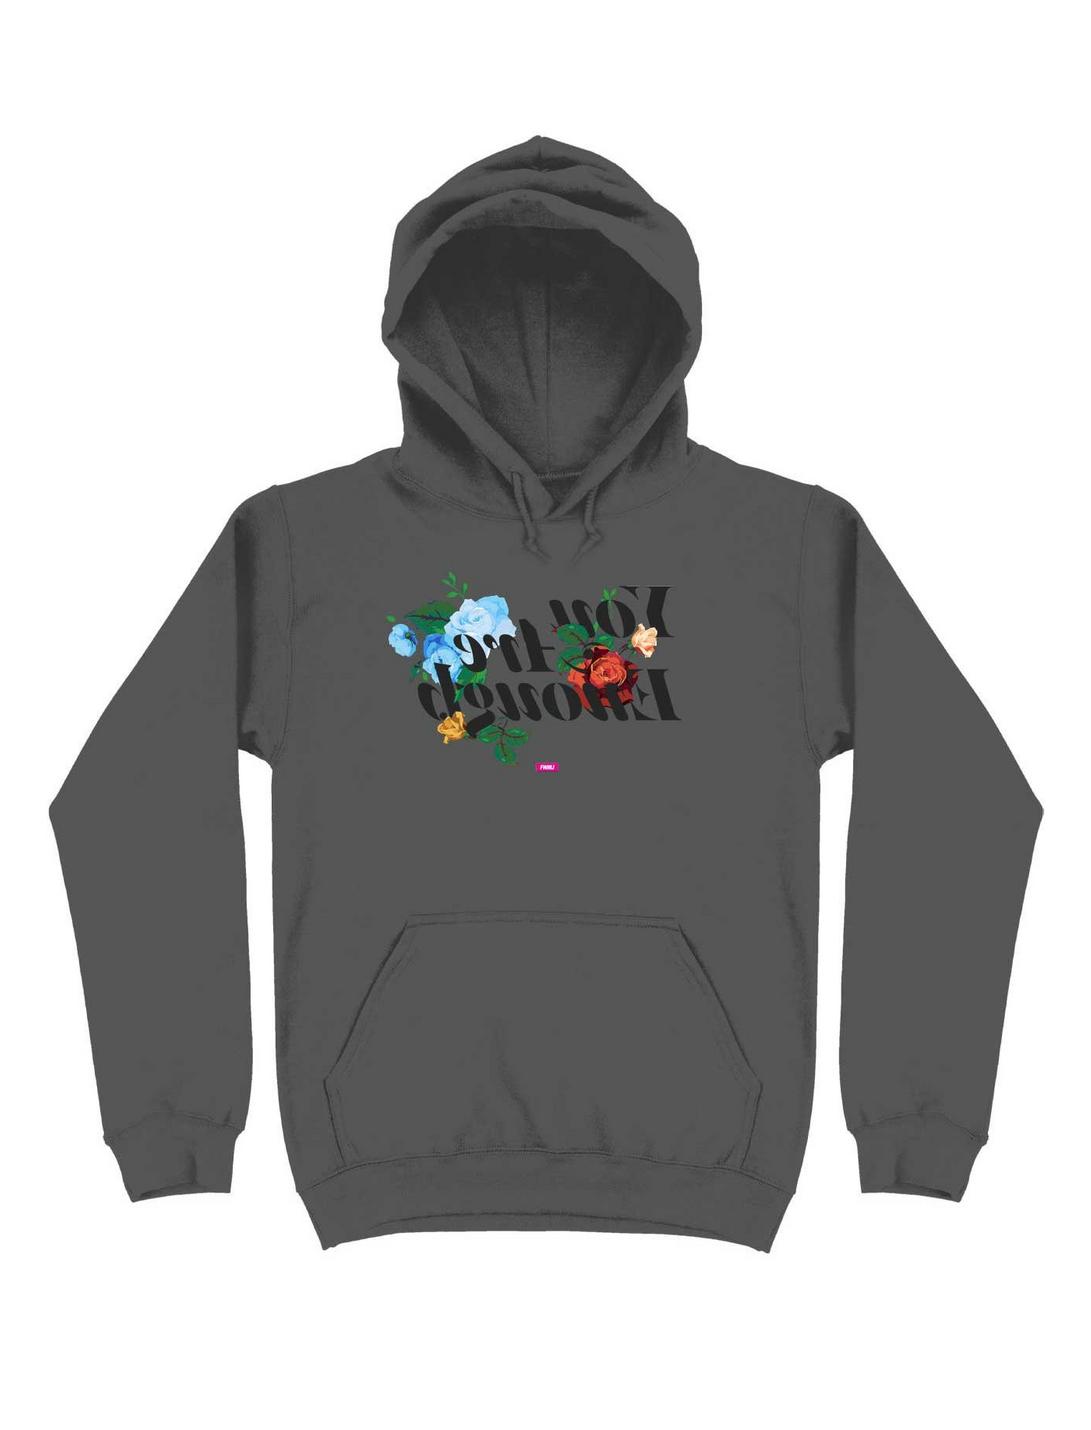 Black History Month FWMJ You Are Enough Hoodie, CHARCOAL, hi-res